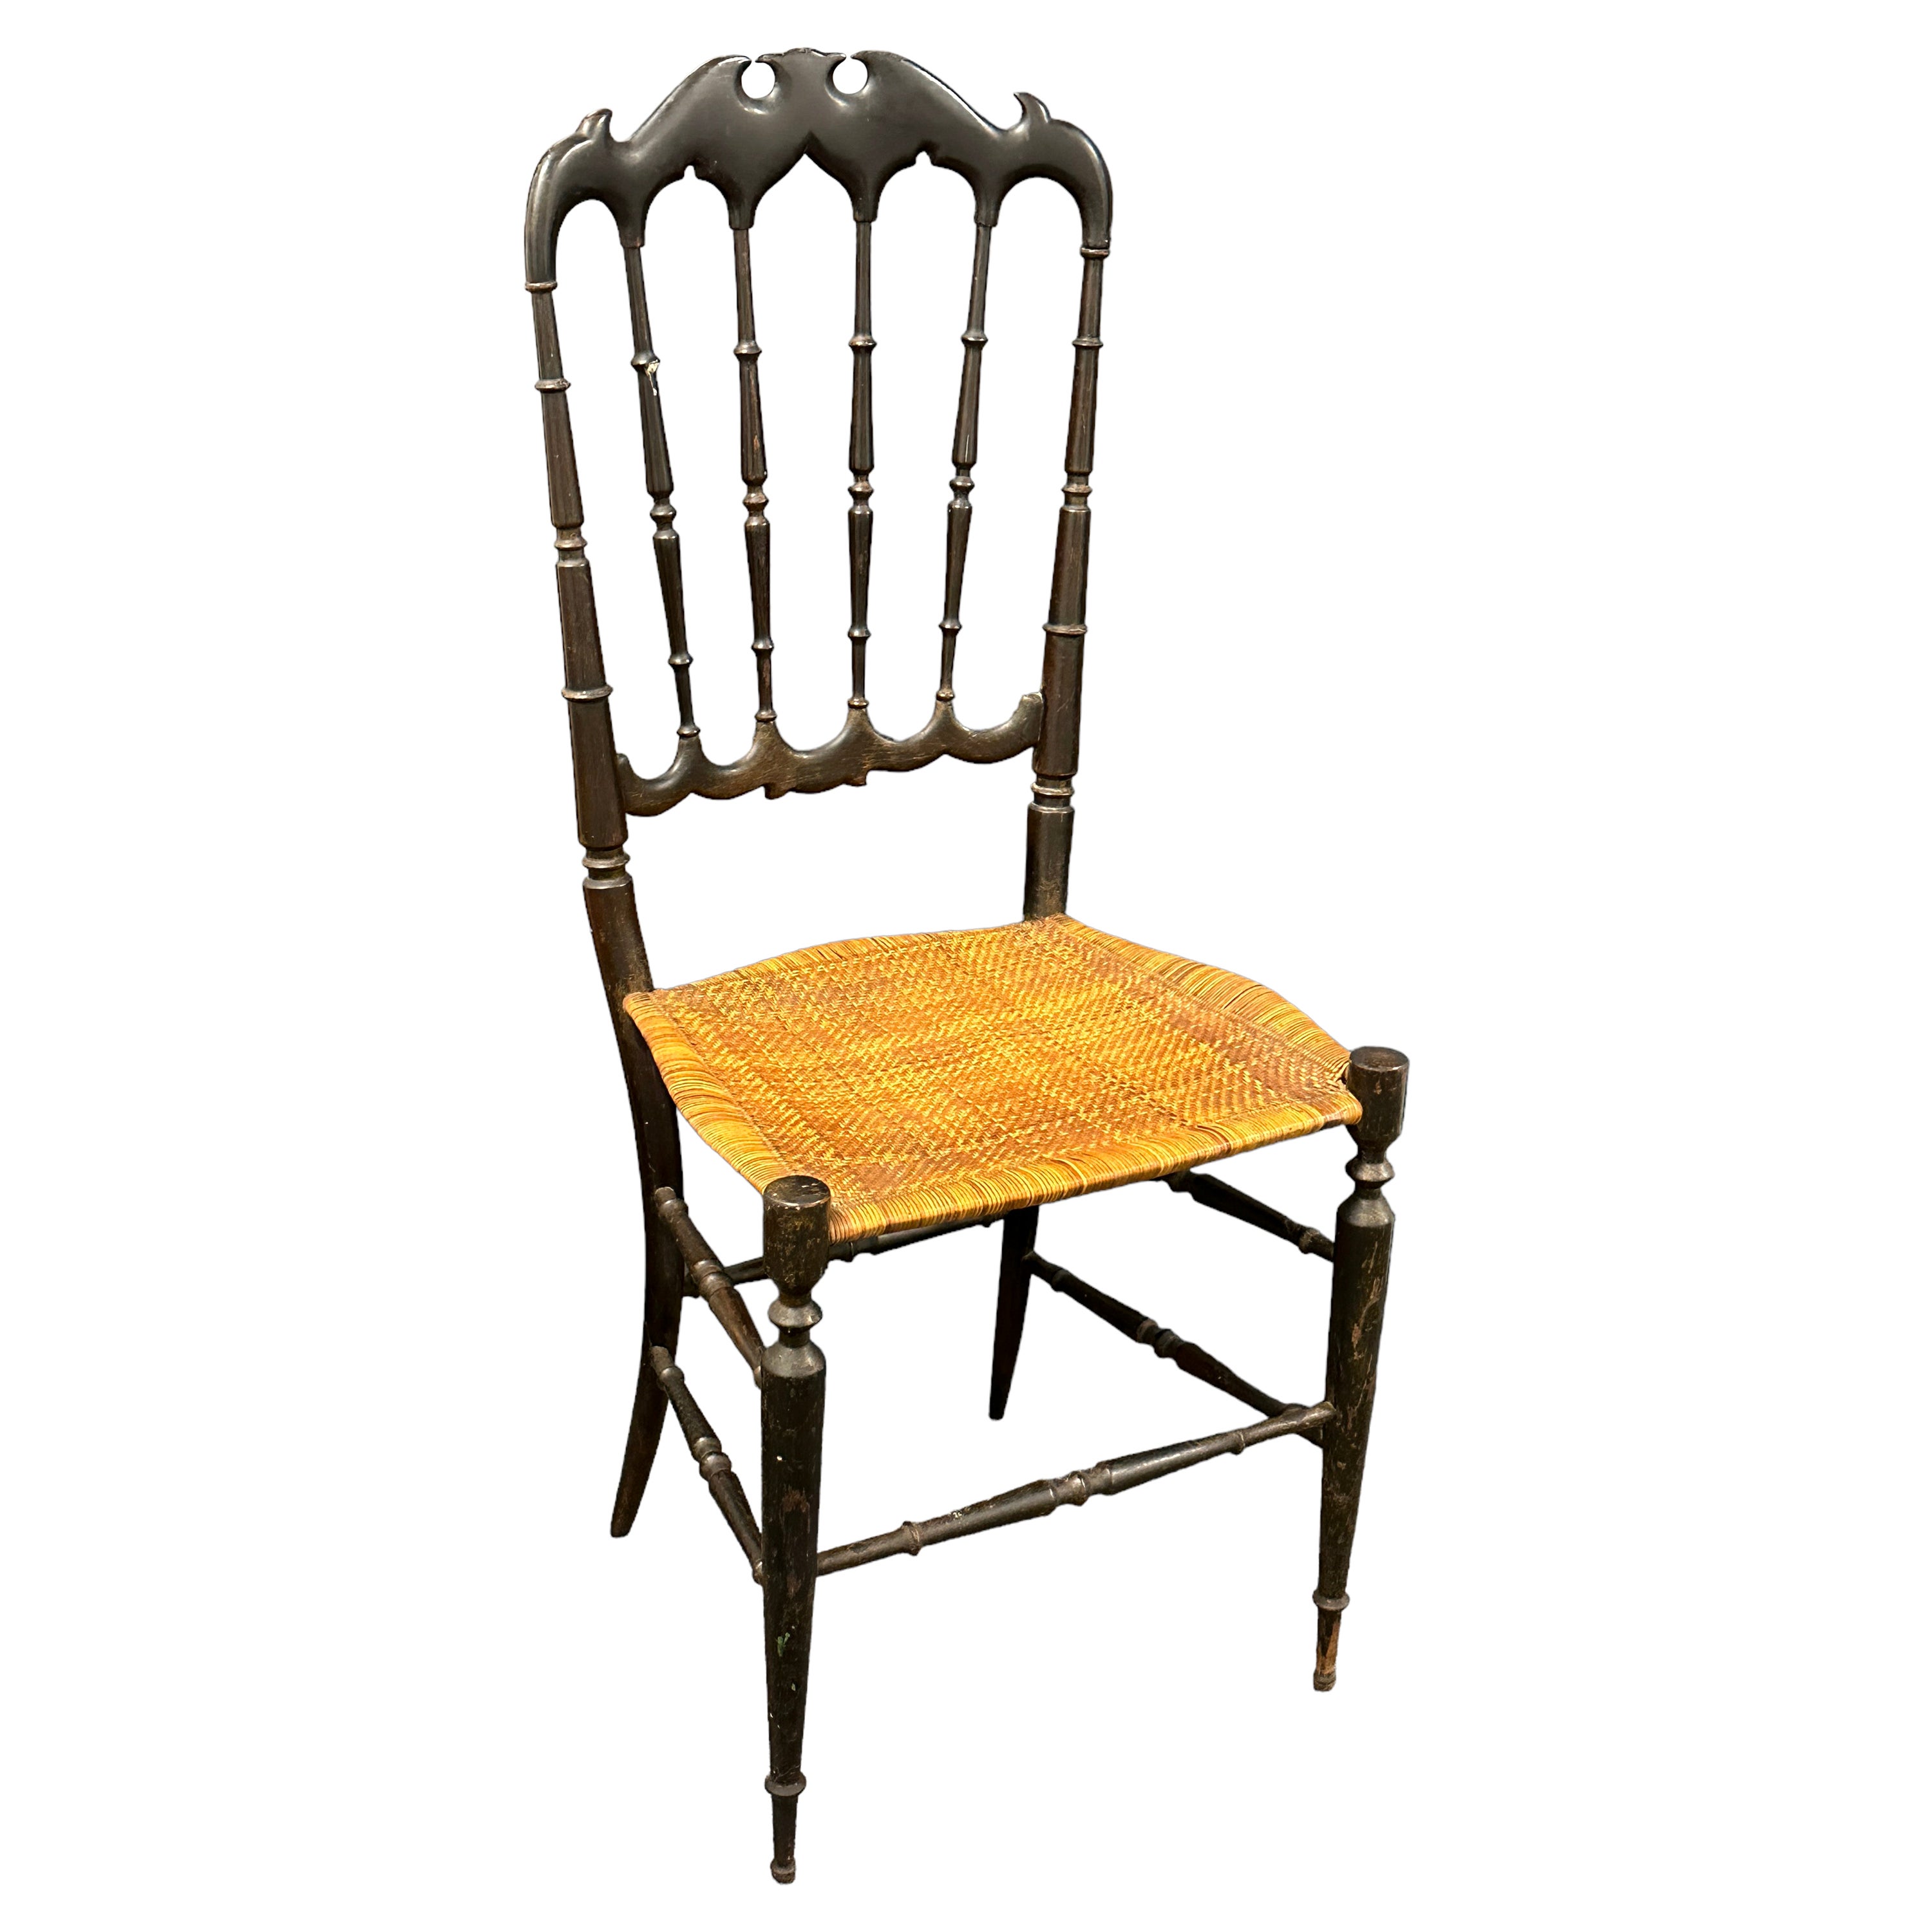 Beautiful Chiavari Wooden Chair Wicker Seat, Made in Liguria, Italy, 1930s For Sale